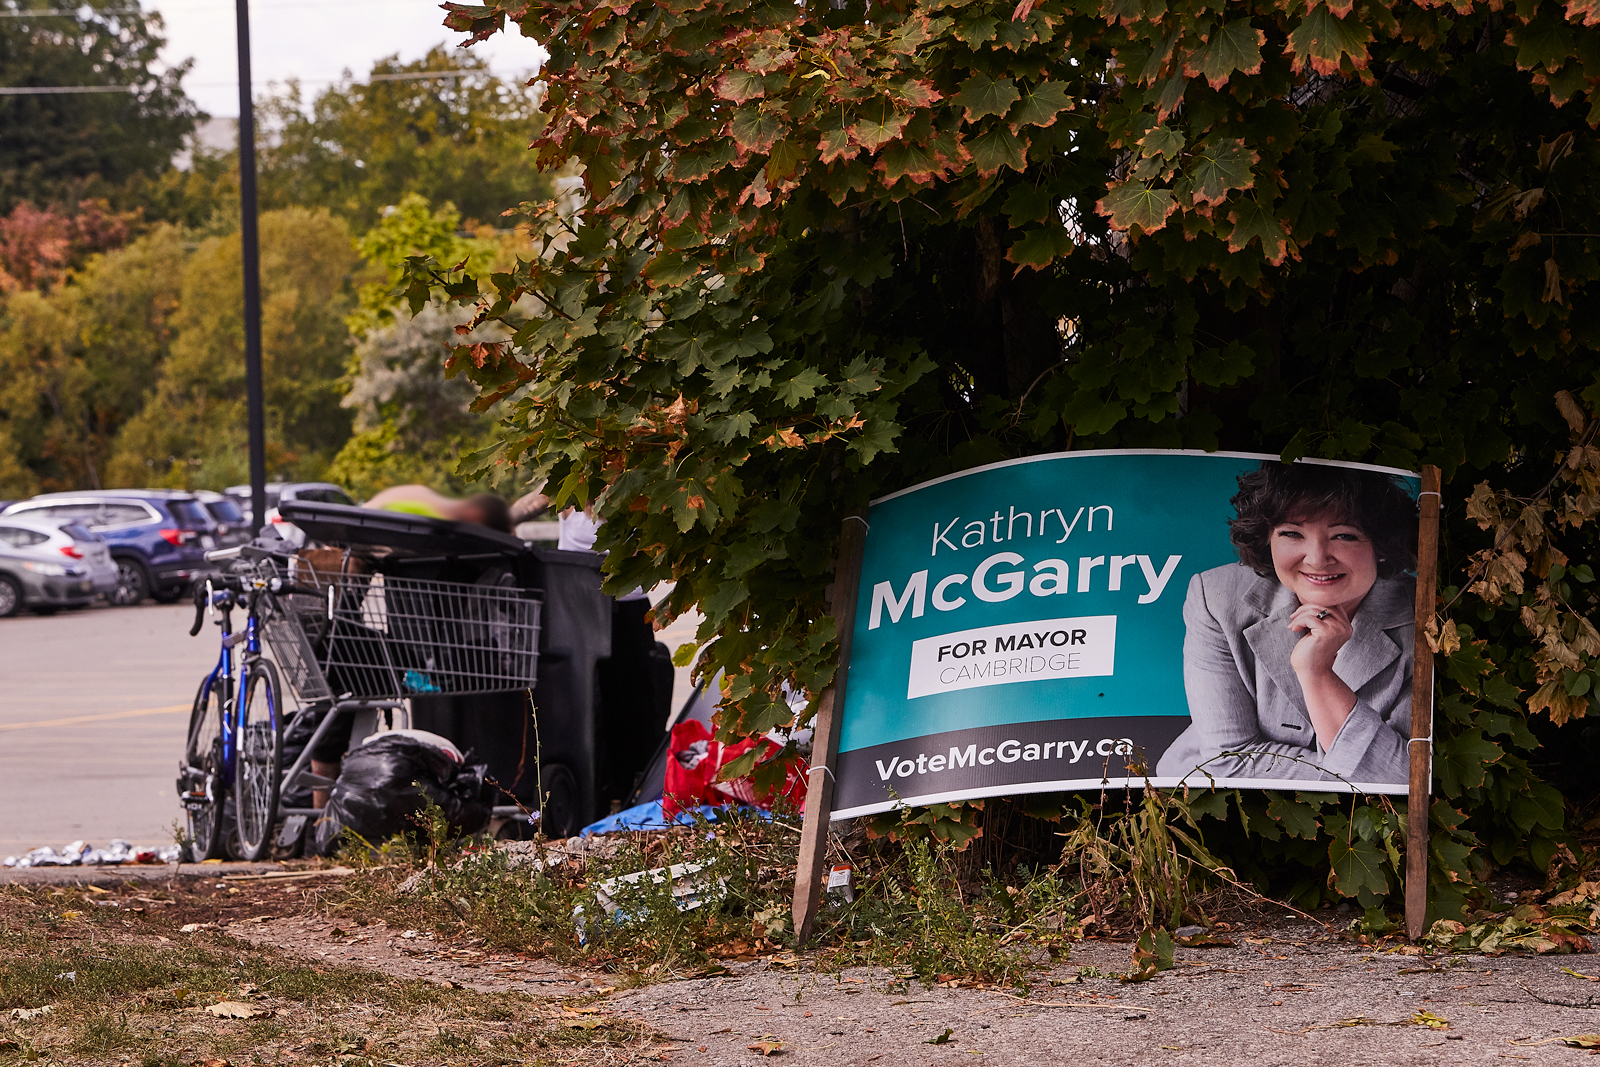 What comes from a vote for McGarry?